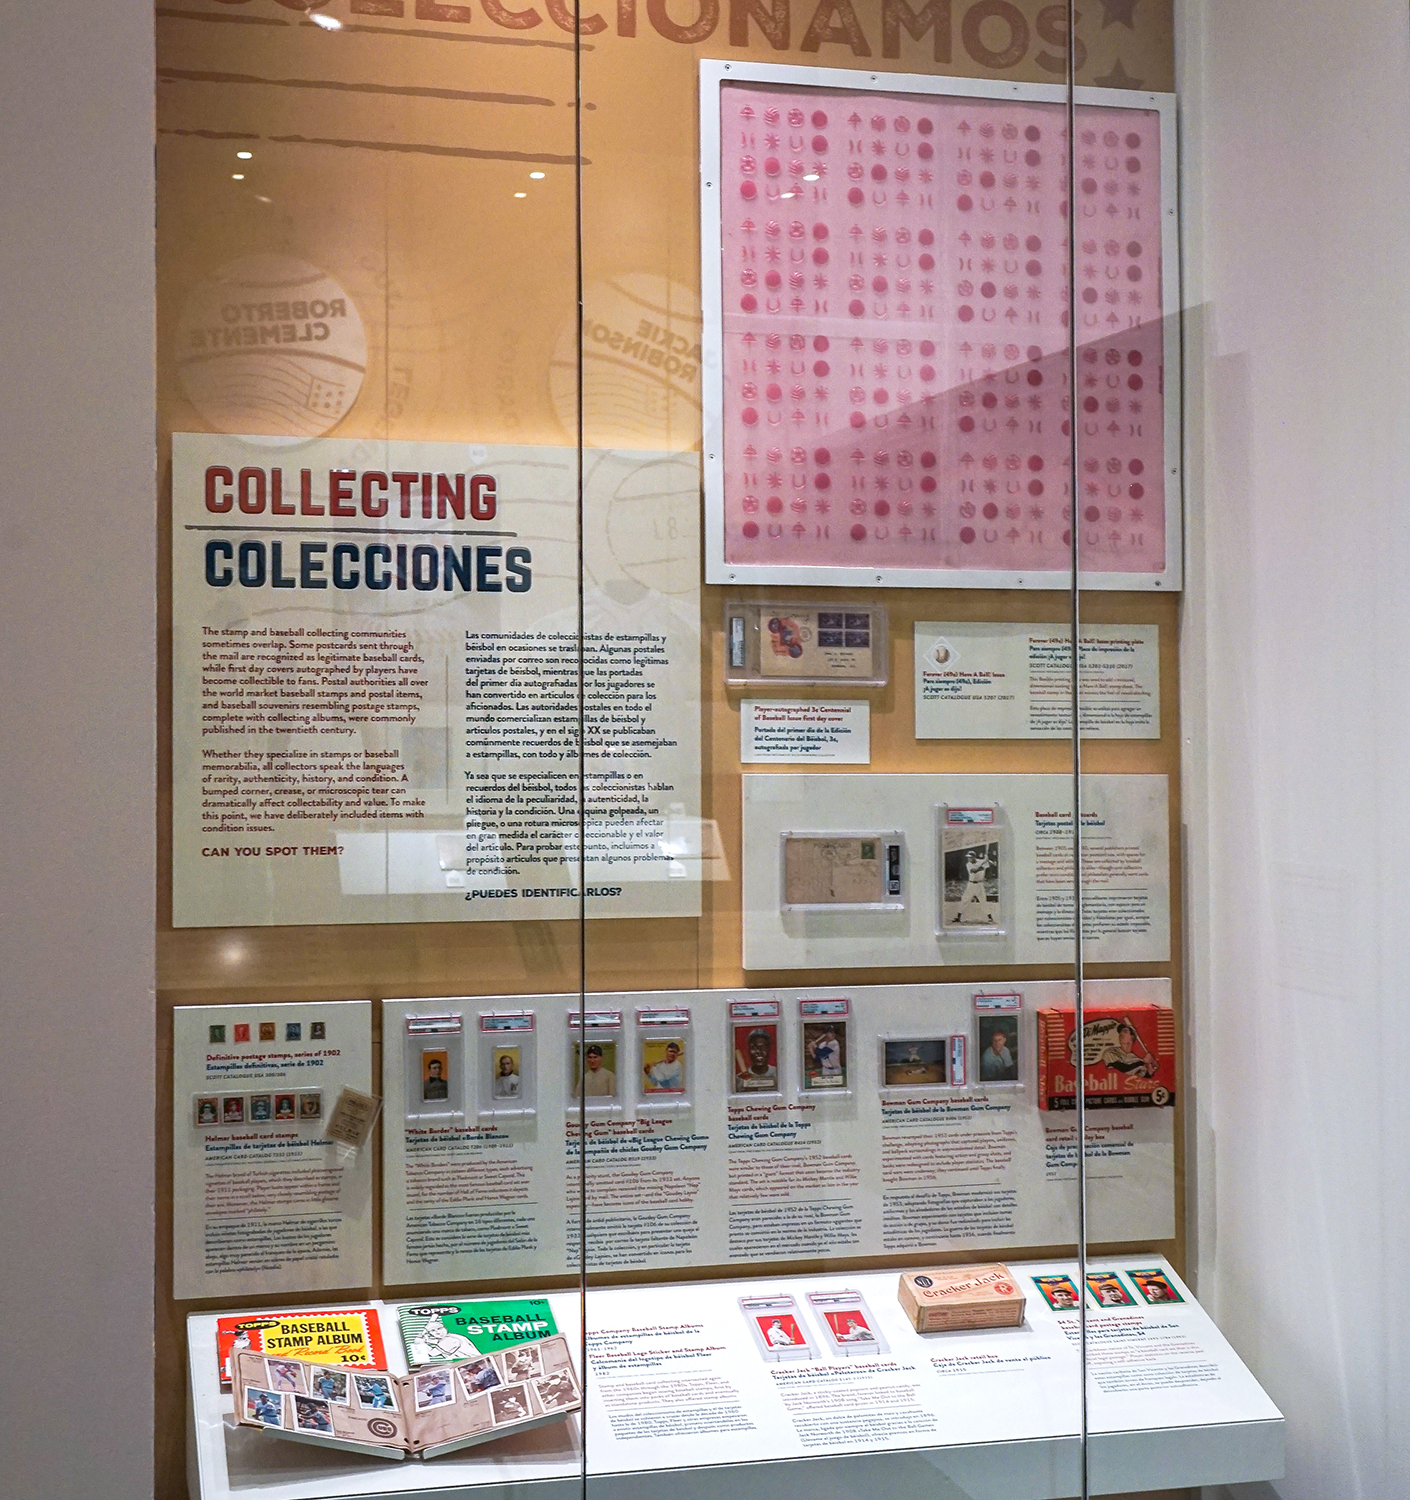 Display cases containing objects related to stamp production and collecting